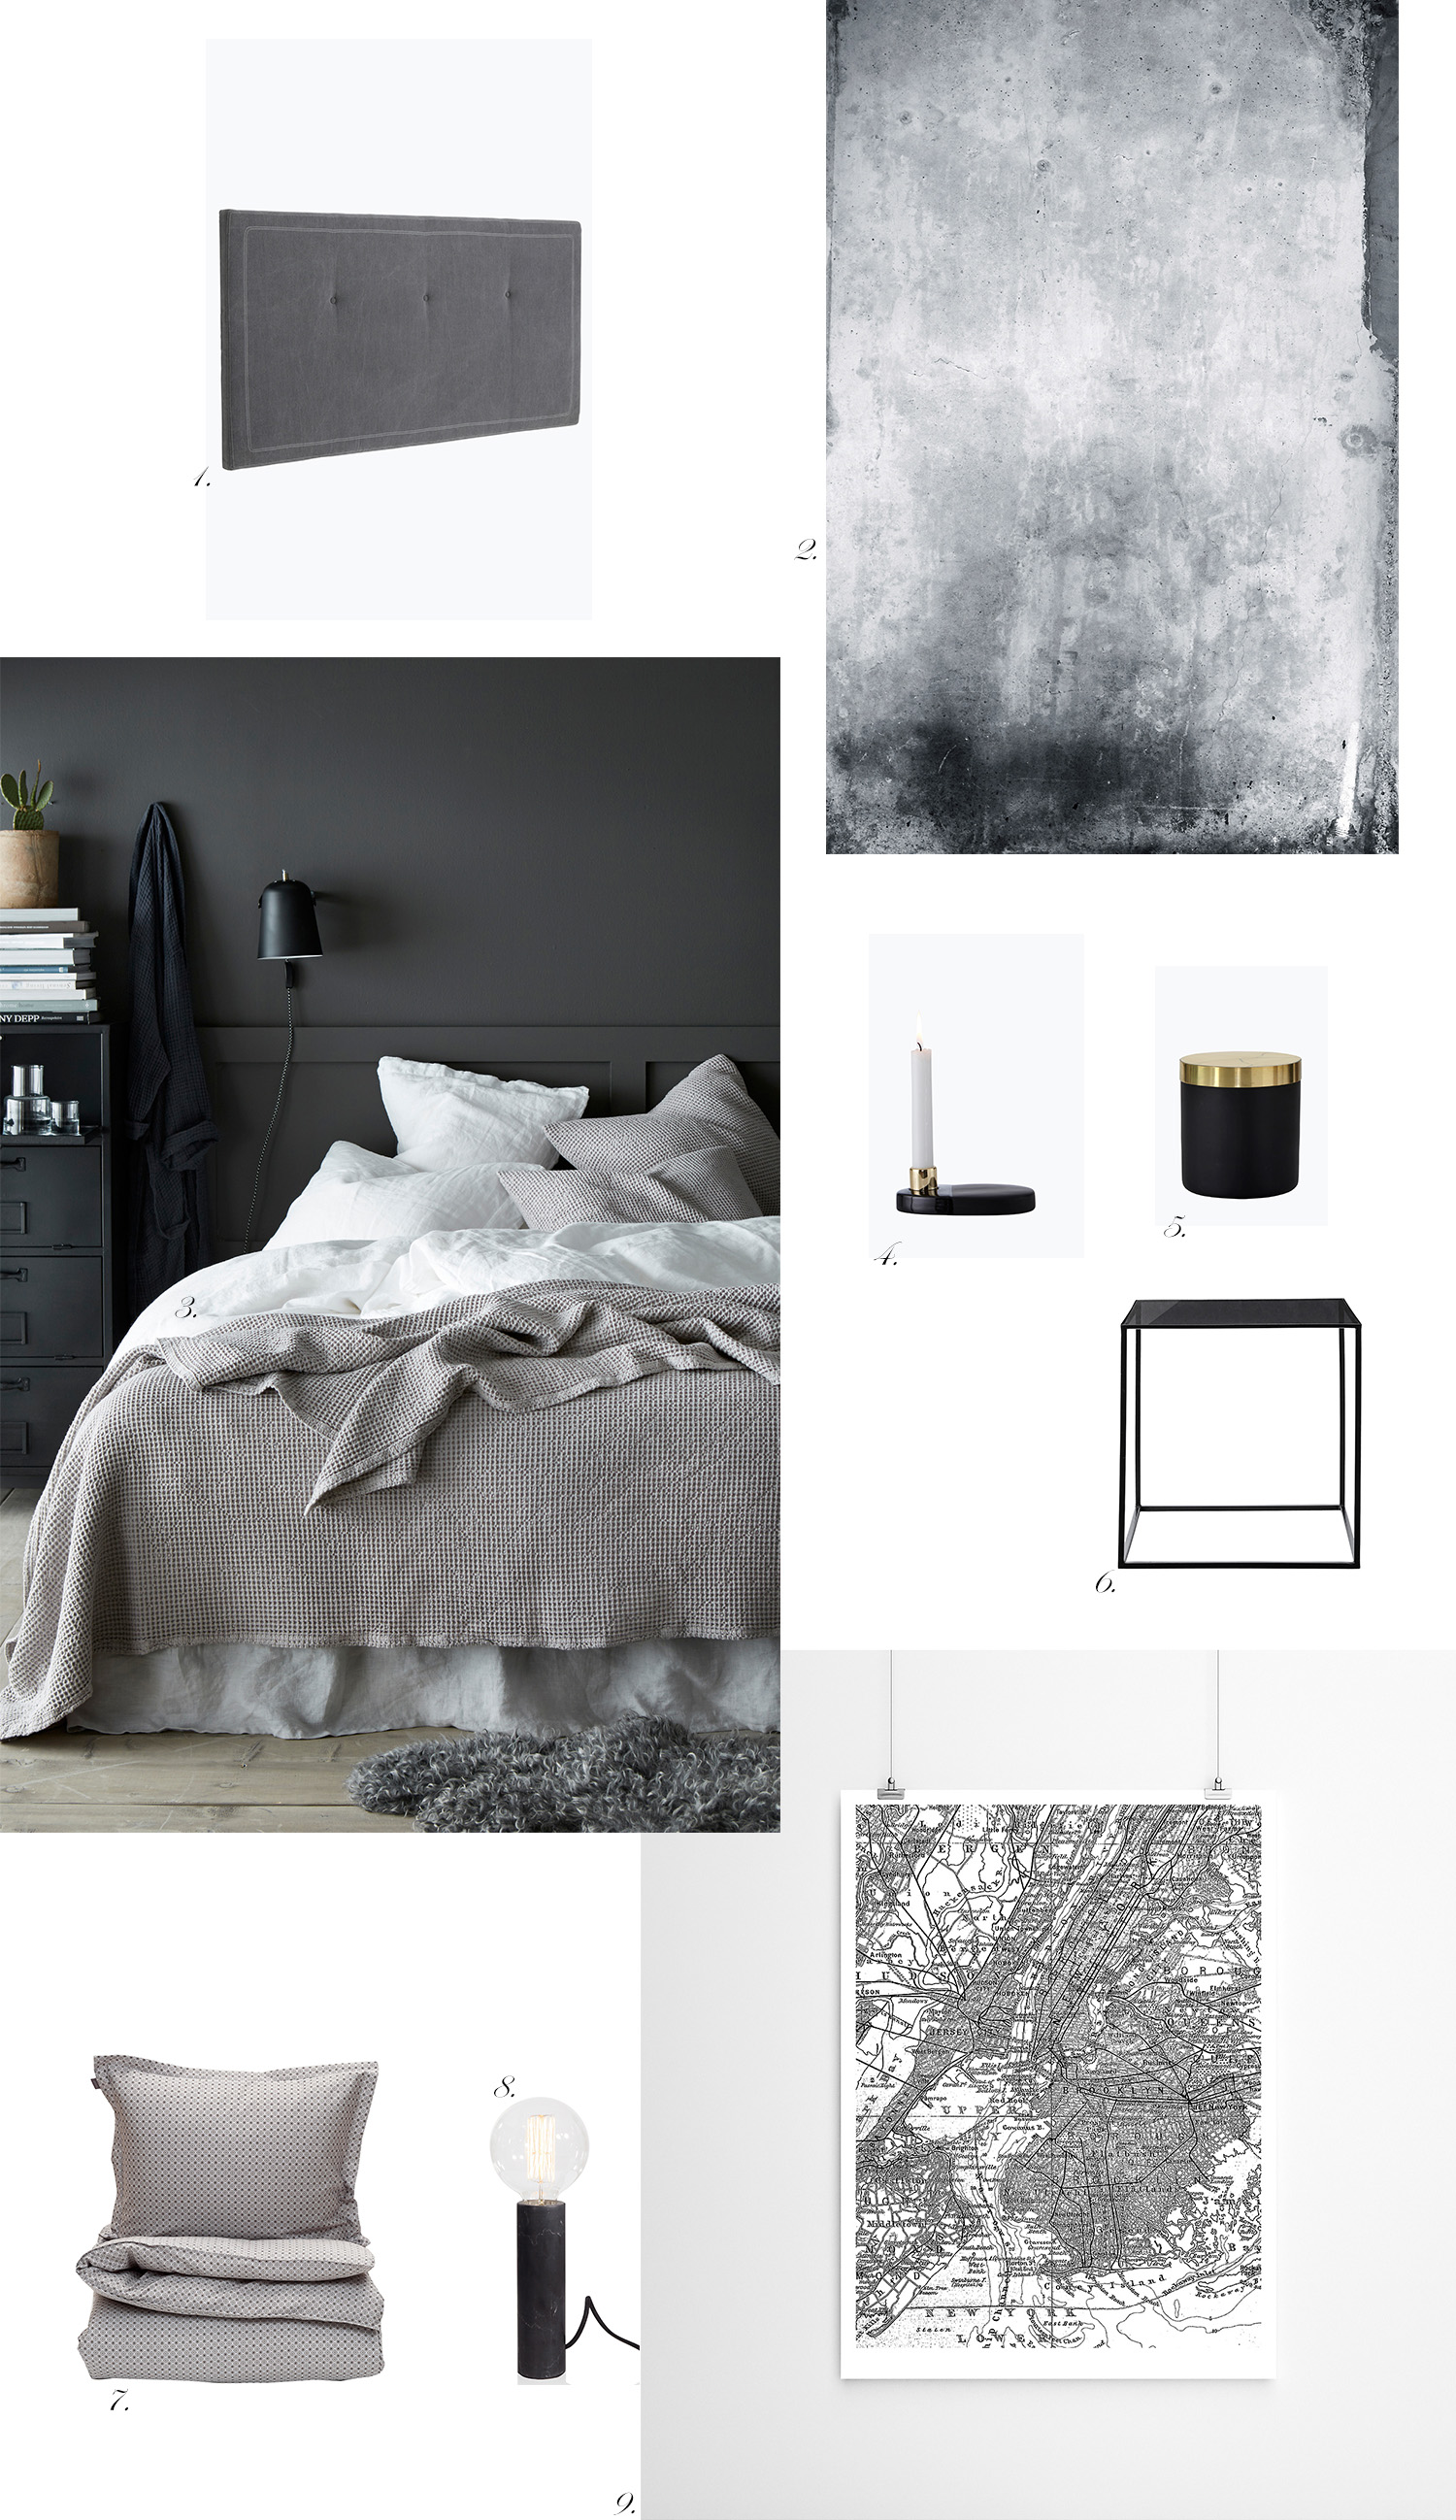 Char and the city - Bachelor pad - ideas for interior design and decoration - inspiration from webshops - grey, black and white - read more on the blog: //www.idealista.fi/charandthecity/2016/09/28/bachelor-pad #bachelorpad #interior #design 